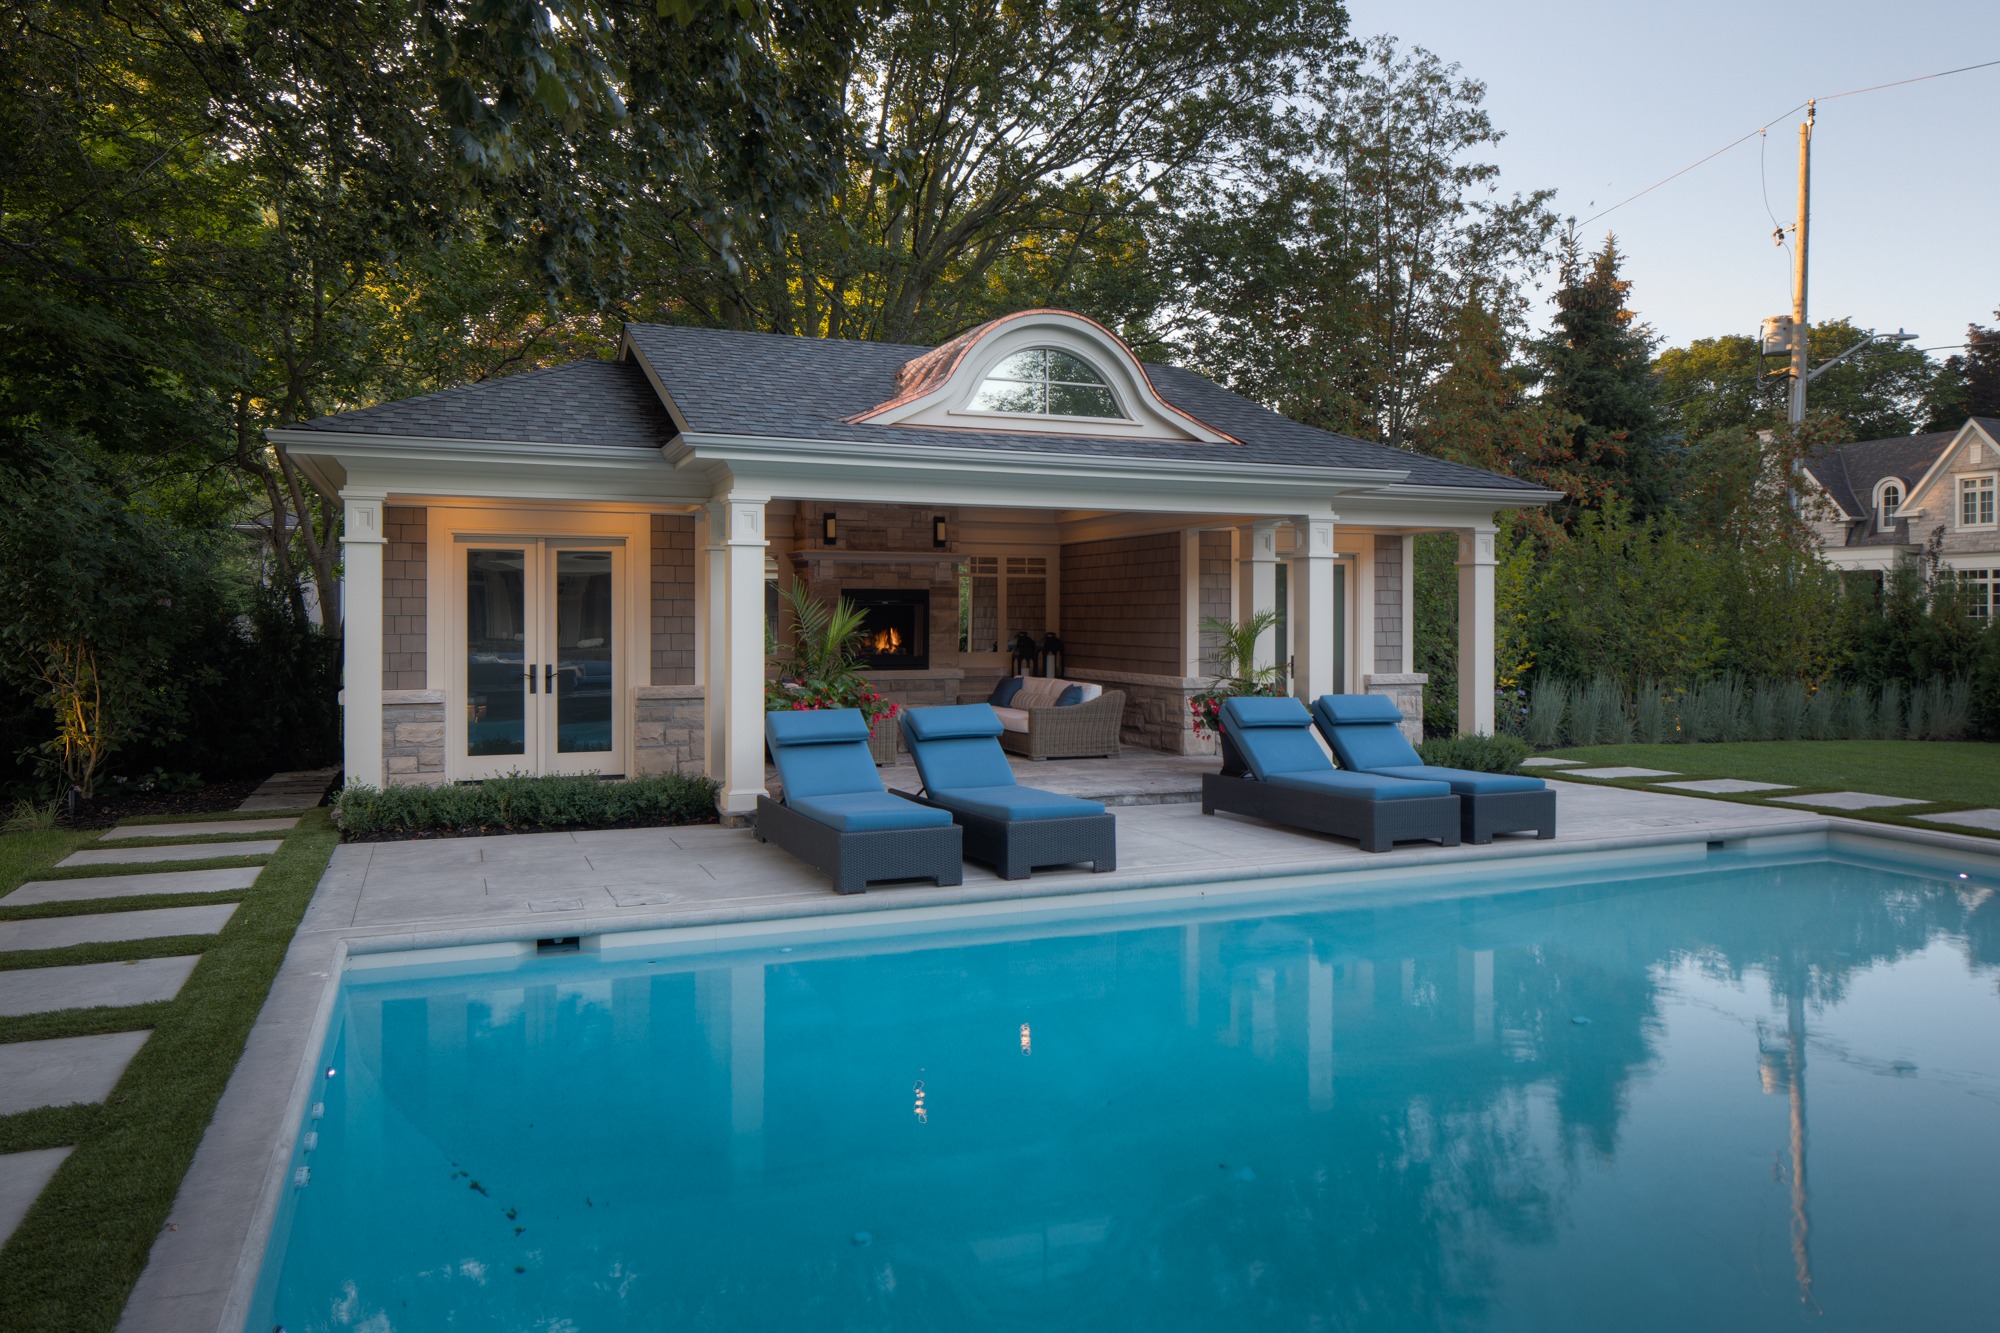 This image depicts a luxurious outdoor pool area with lounge chairs, an elegant pool house with a cozy fireplace, and lush greenery surroundings at dusk.